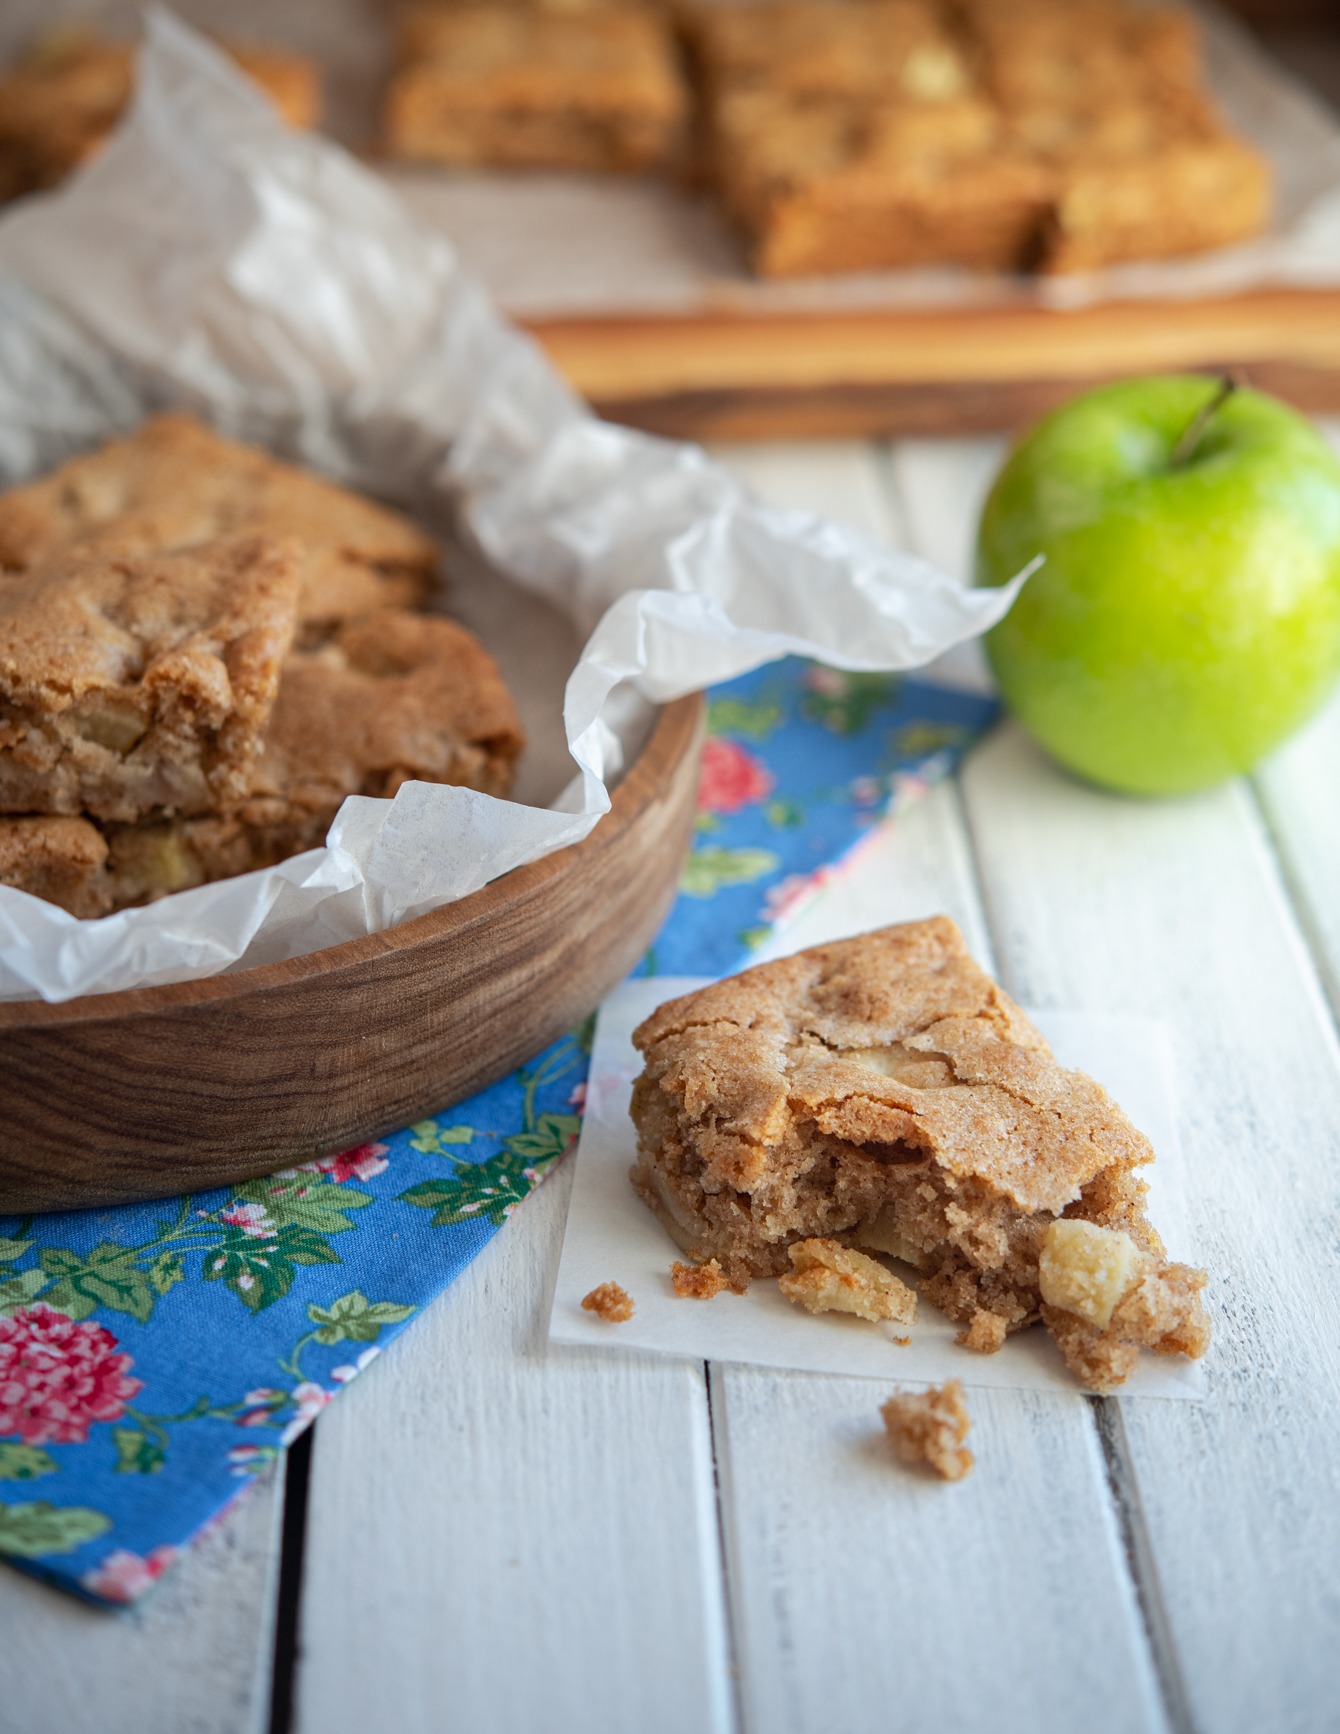 A slice of apple brownies (or apple blondies) showing its moist texture.